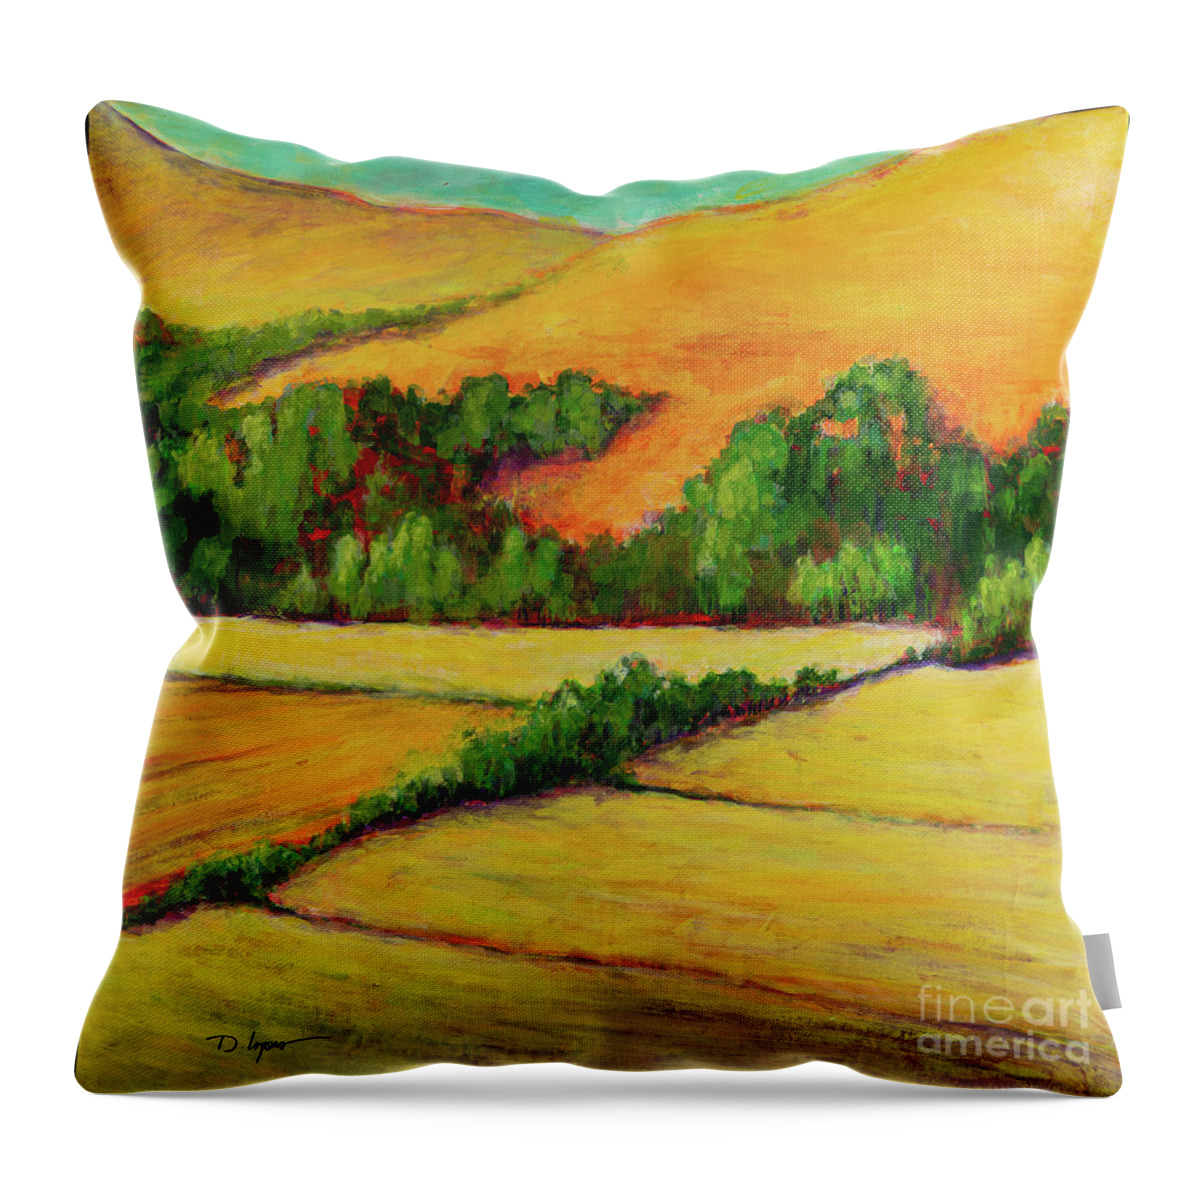 Abstract Throw Pillow featuring the digital art Hill - Colorful Abstract Contemporary Acrylic Painting by Sambel Pedes